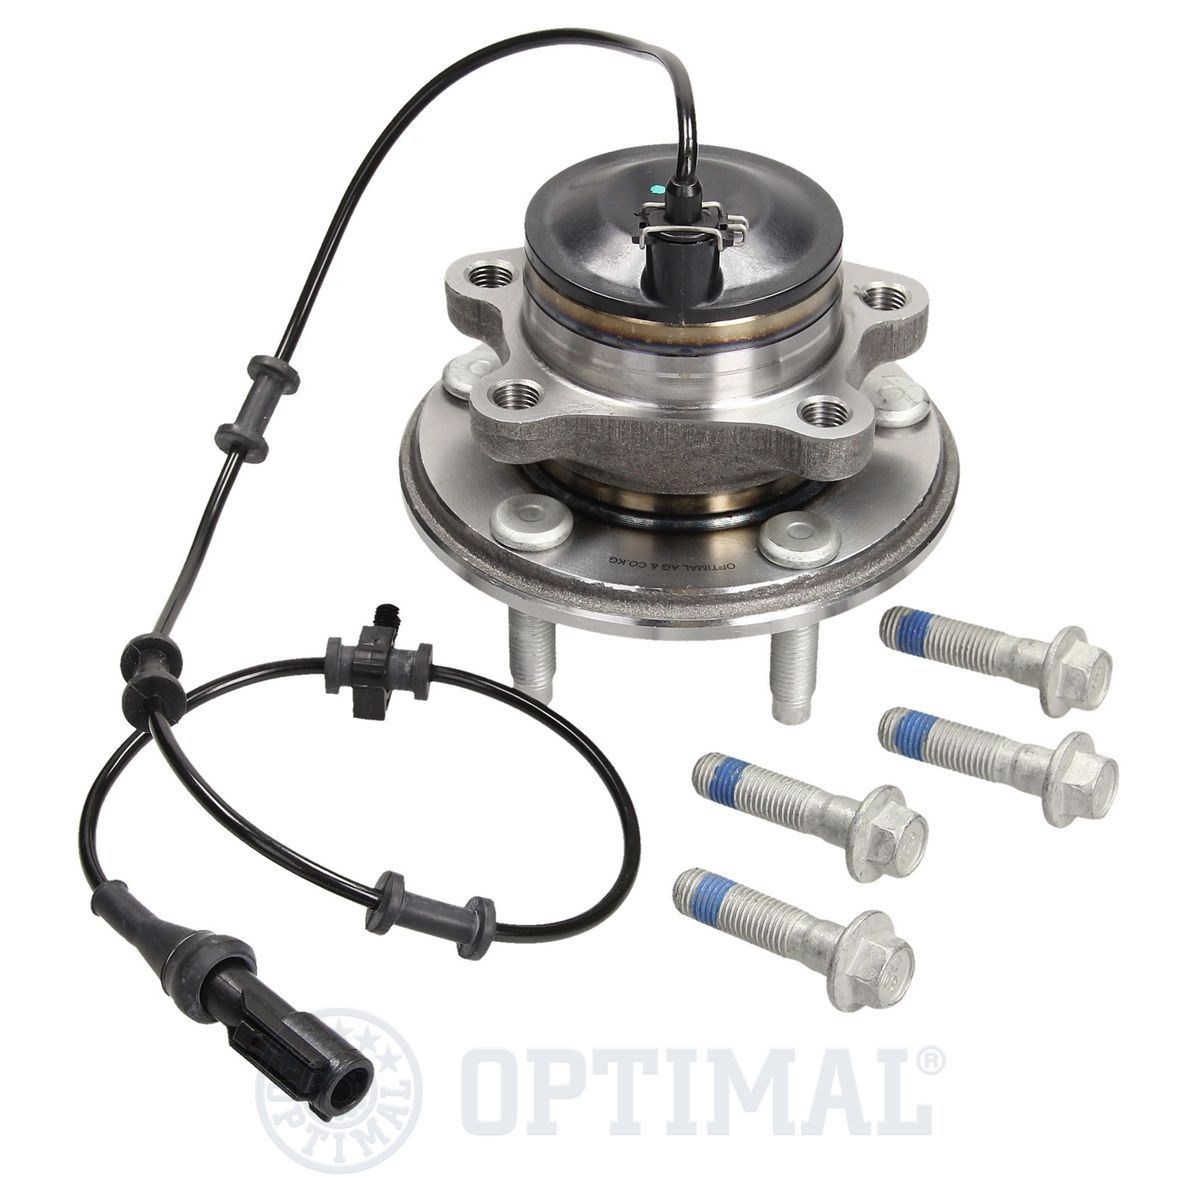 OPTIMAL 301106 Wheel bearing kit with integrated ABS sensor, with integrated magnetic sensor ring, 139 mm